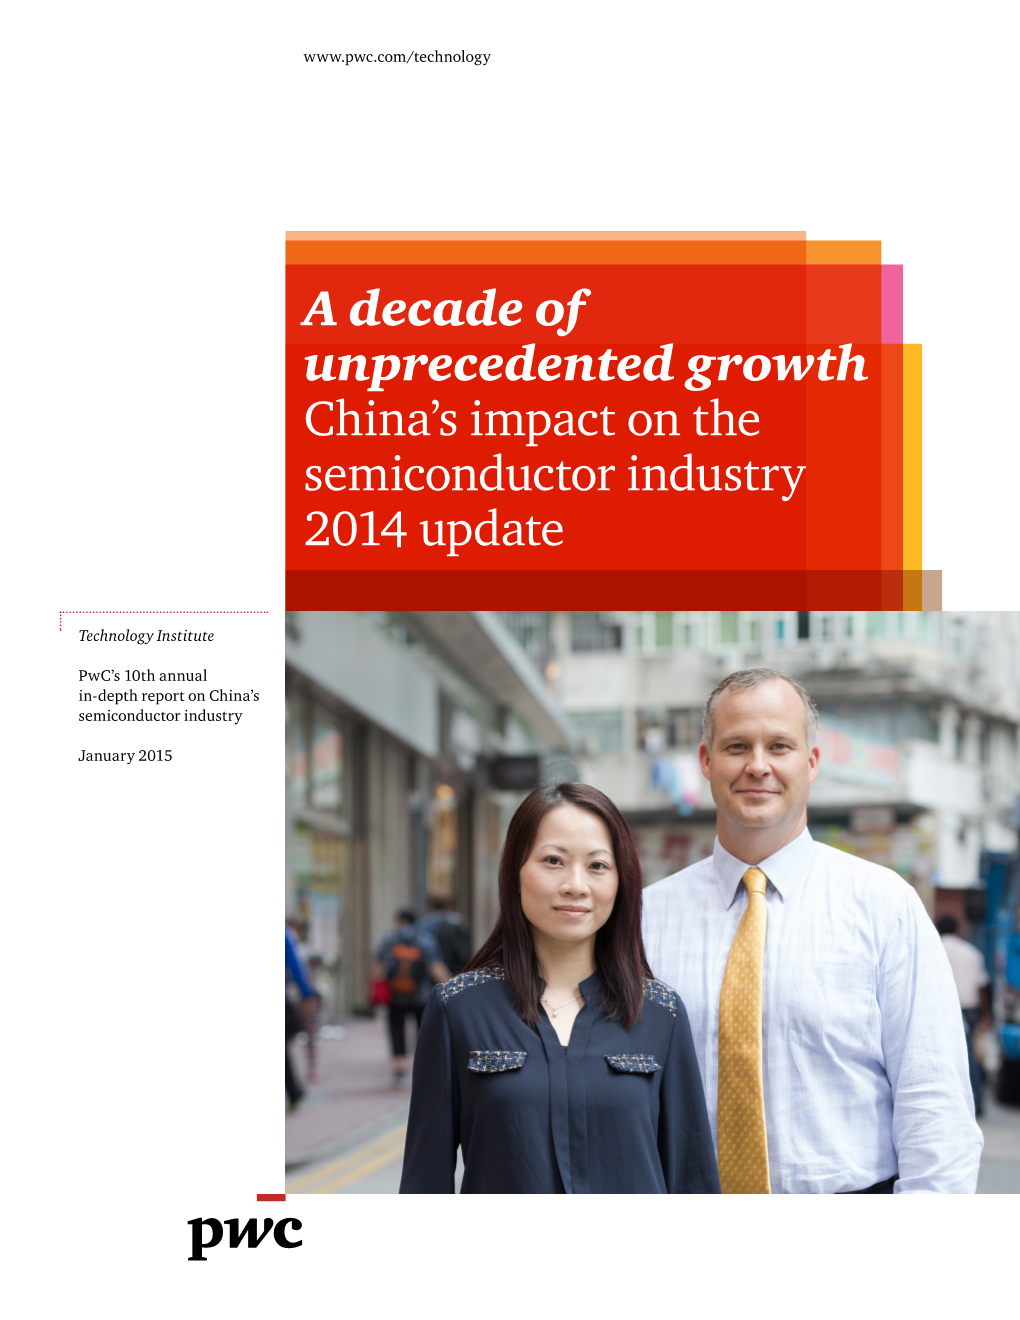 A Decade of Unprecedented Growth China's Impact on the Semiconductor Industry 2014 Update